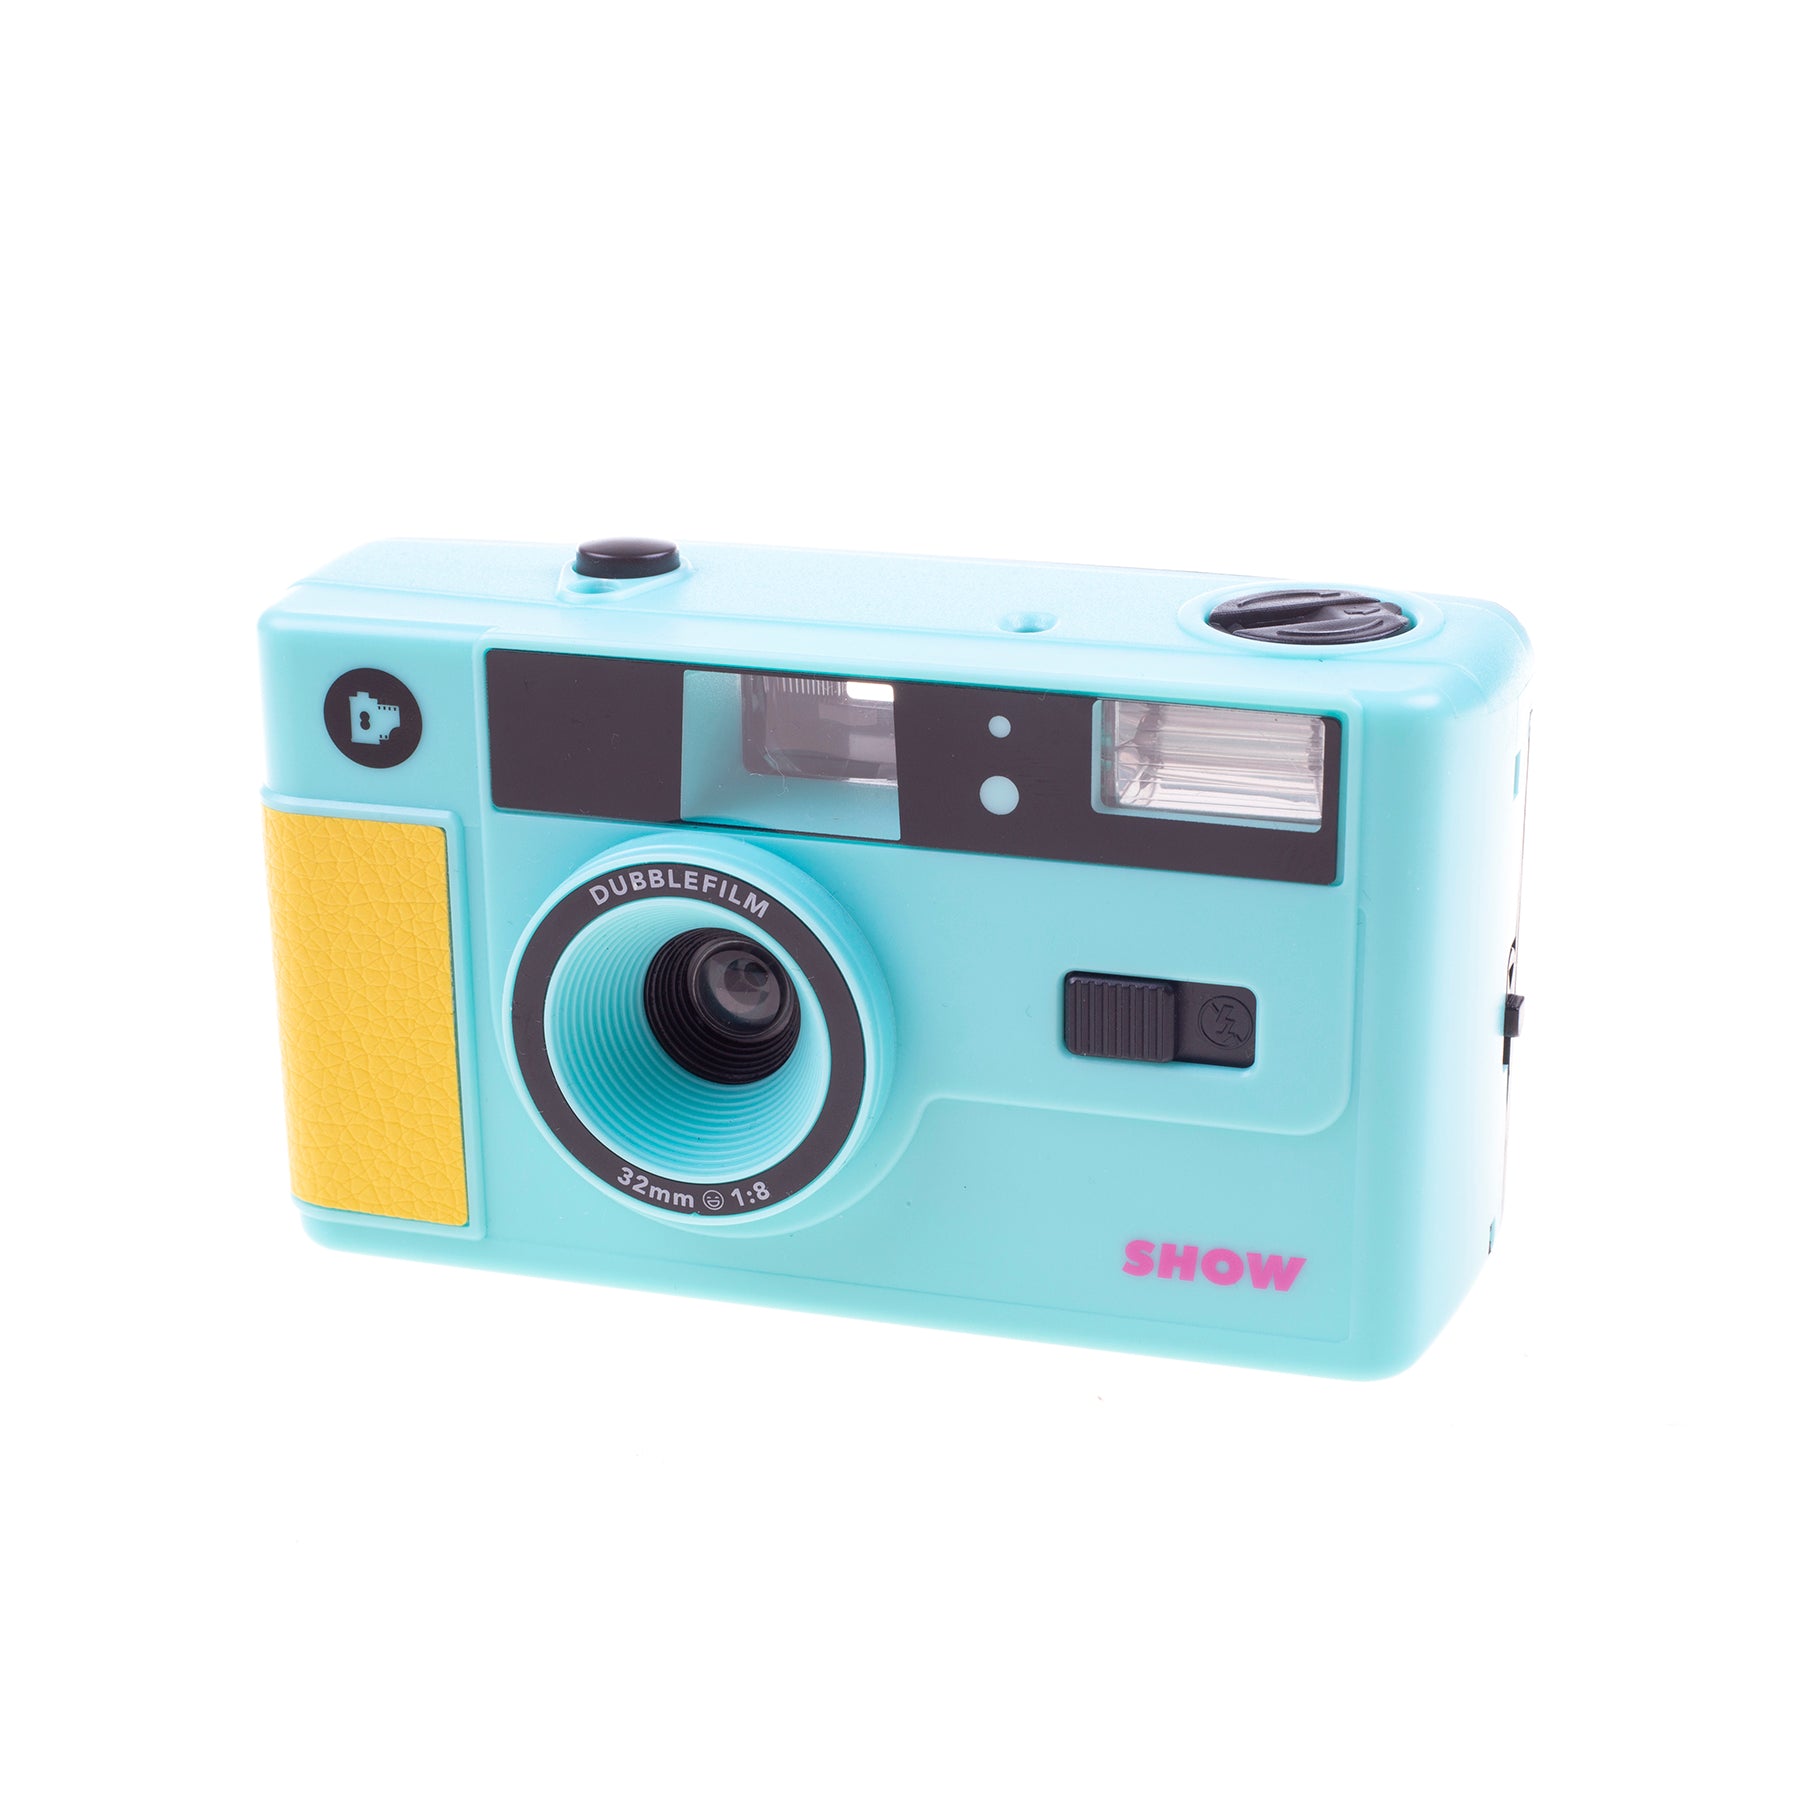 SHOW camera - Turquoise